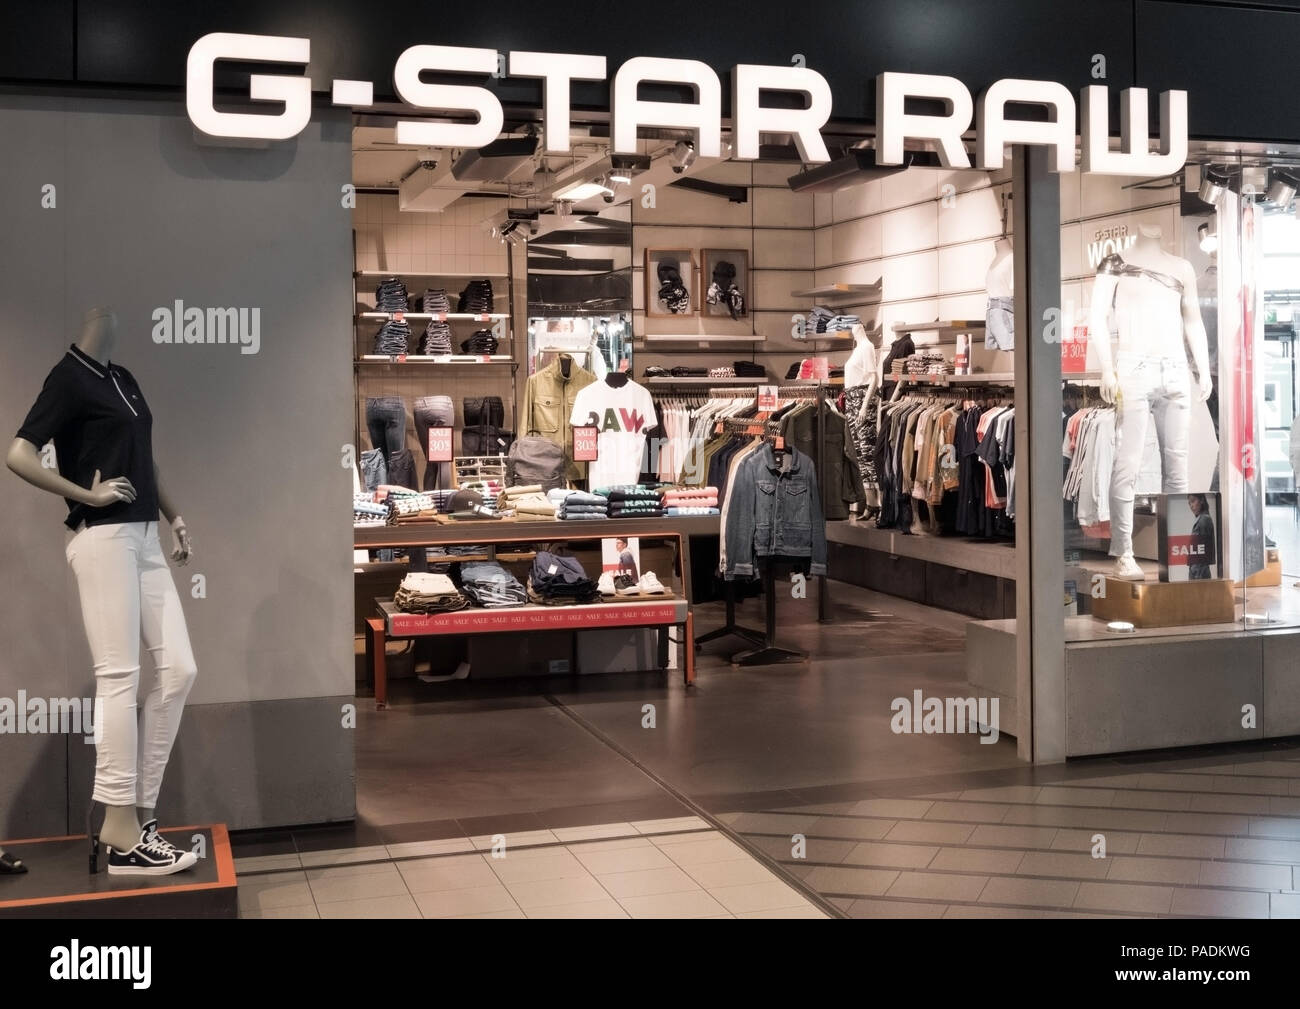 AMSTERDAM, NETHERLANDS - JULY 18, 2018: G-Star Raw shop entrance in duty  free airport shopping Stock Photo - Alamy